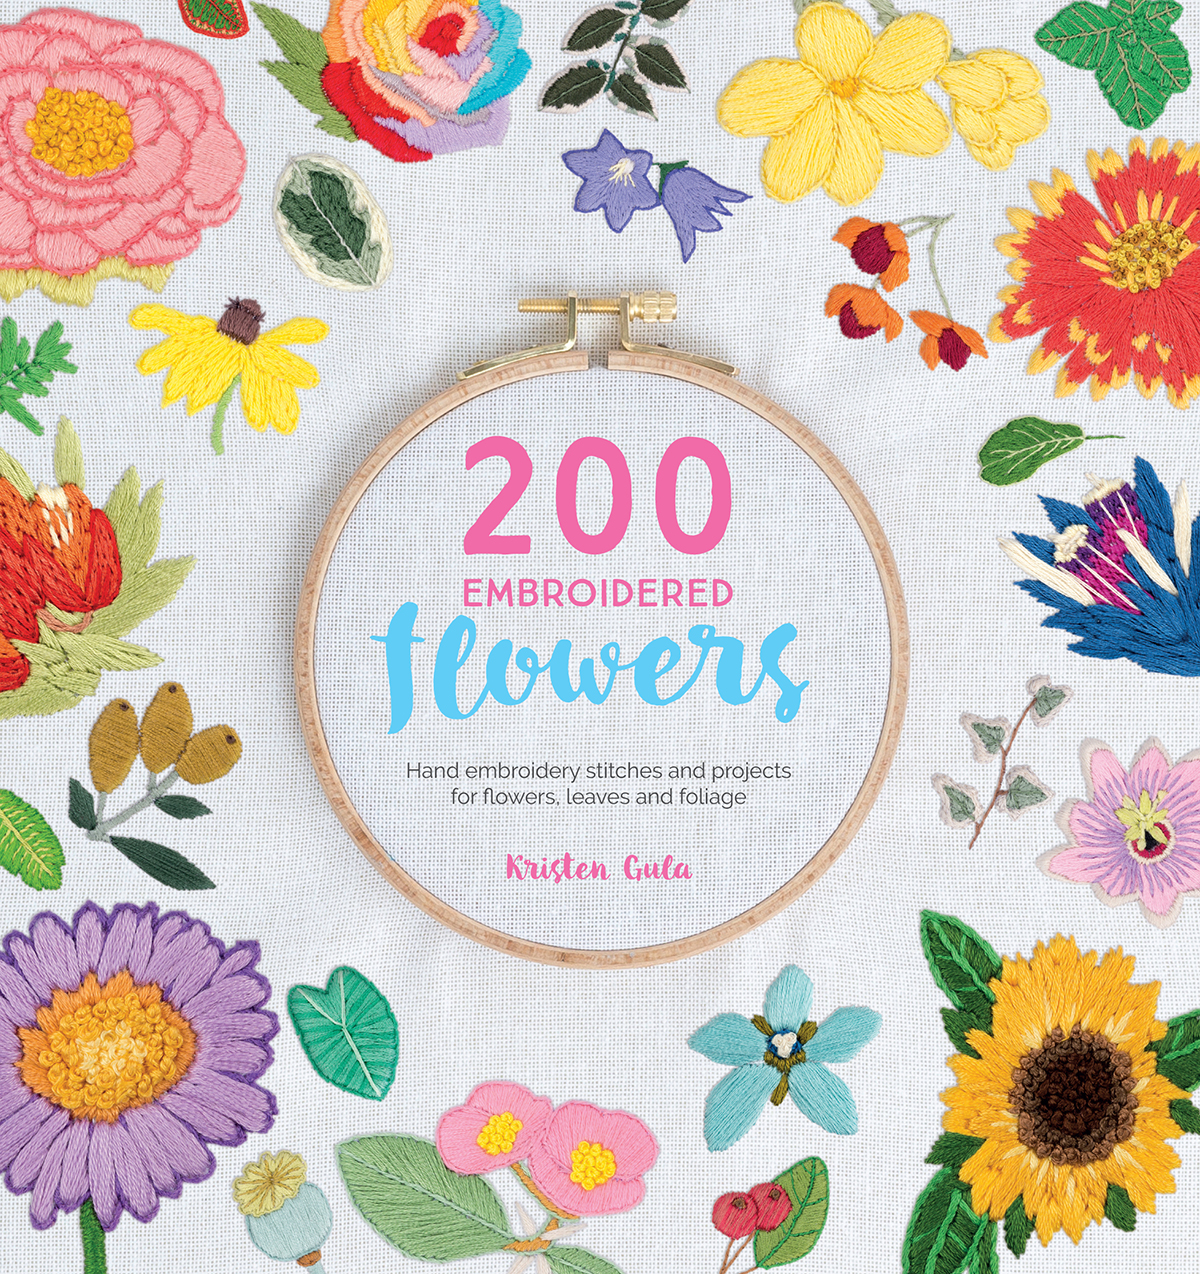 200 embroidered flowers hand embroidery stitches and projects for flowers leaves and foliage - image 1